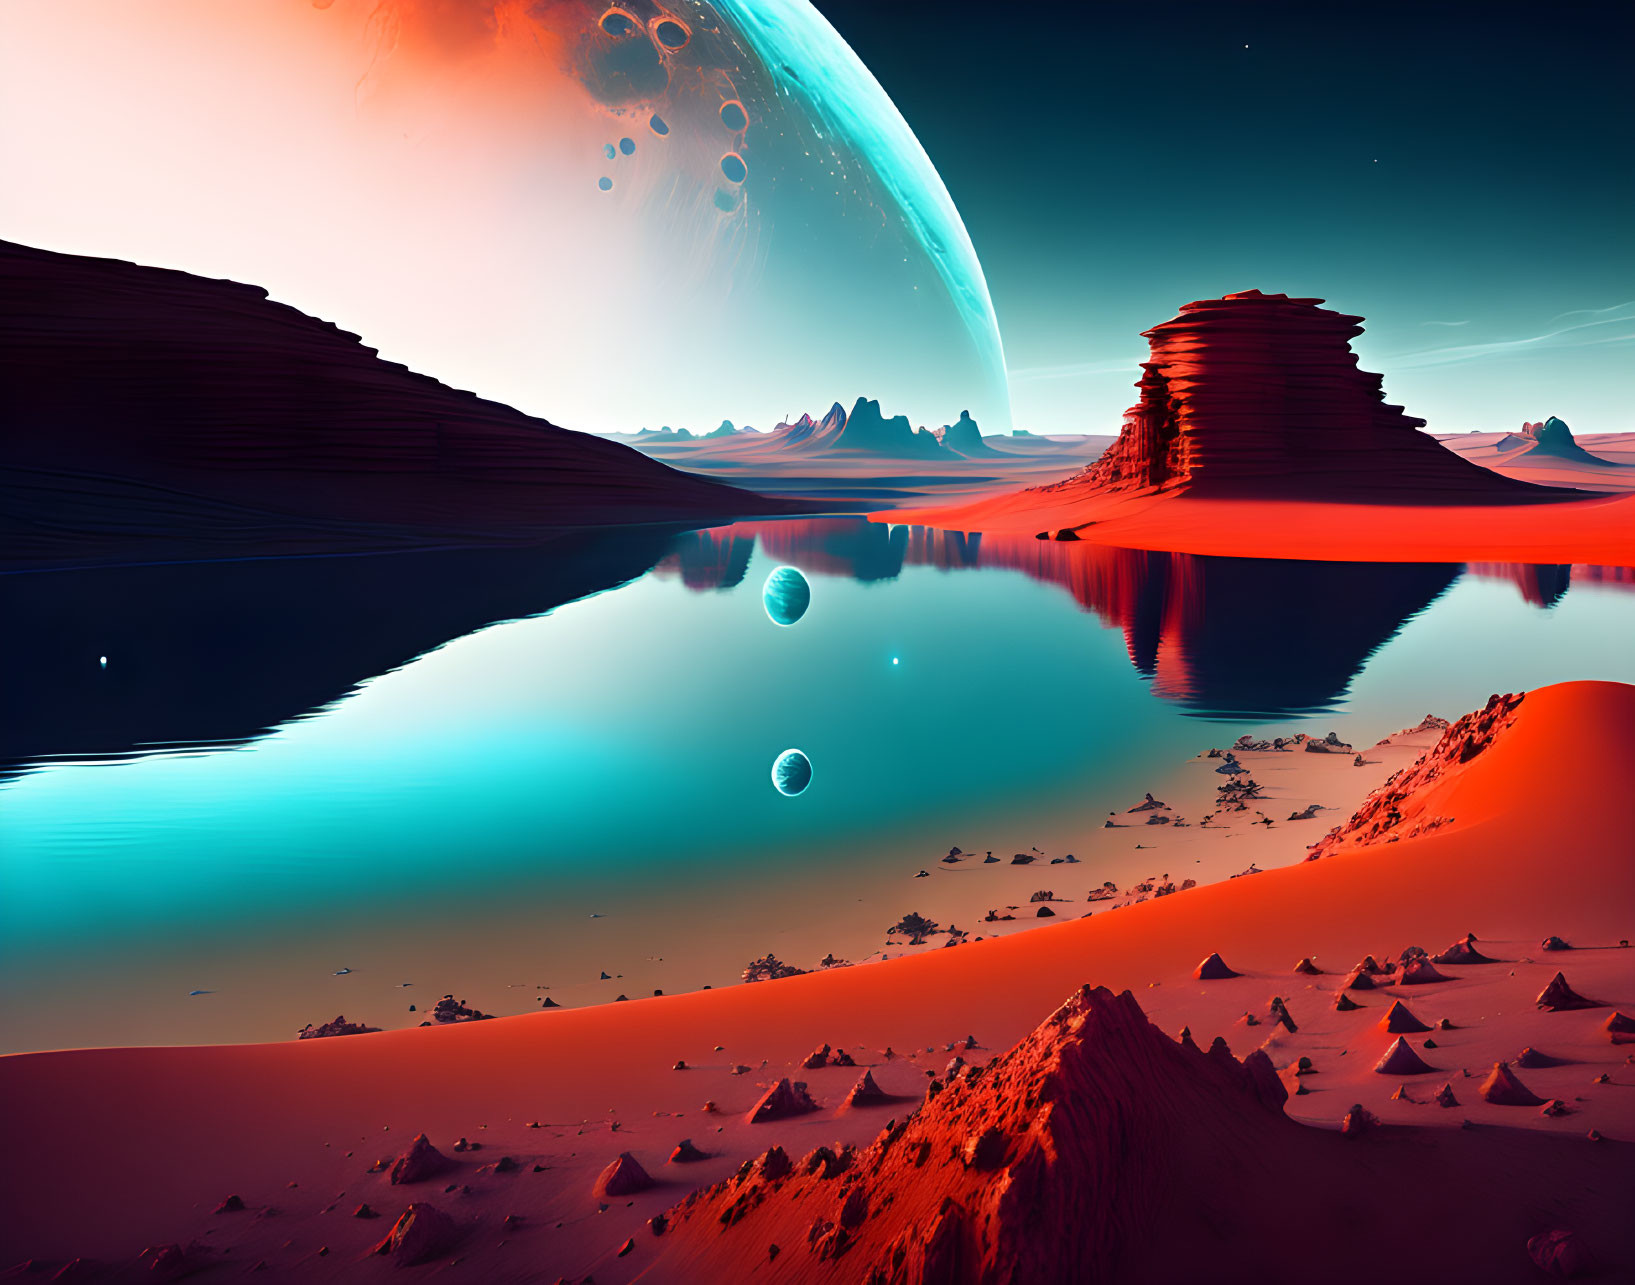 Alien landscape with red sand, reflective lake, and celestial bodies